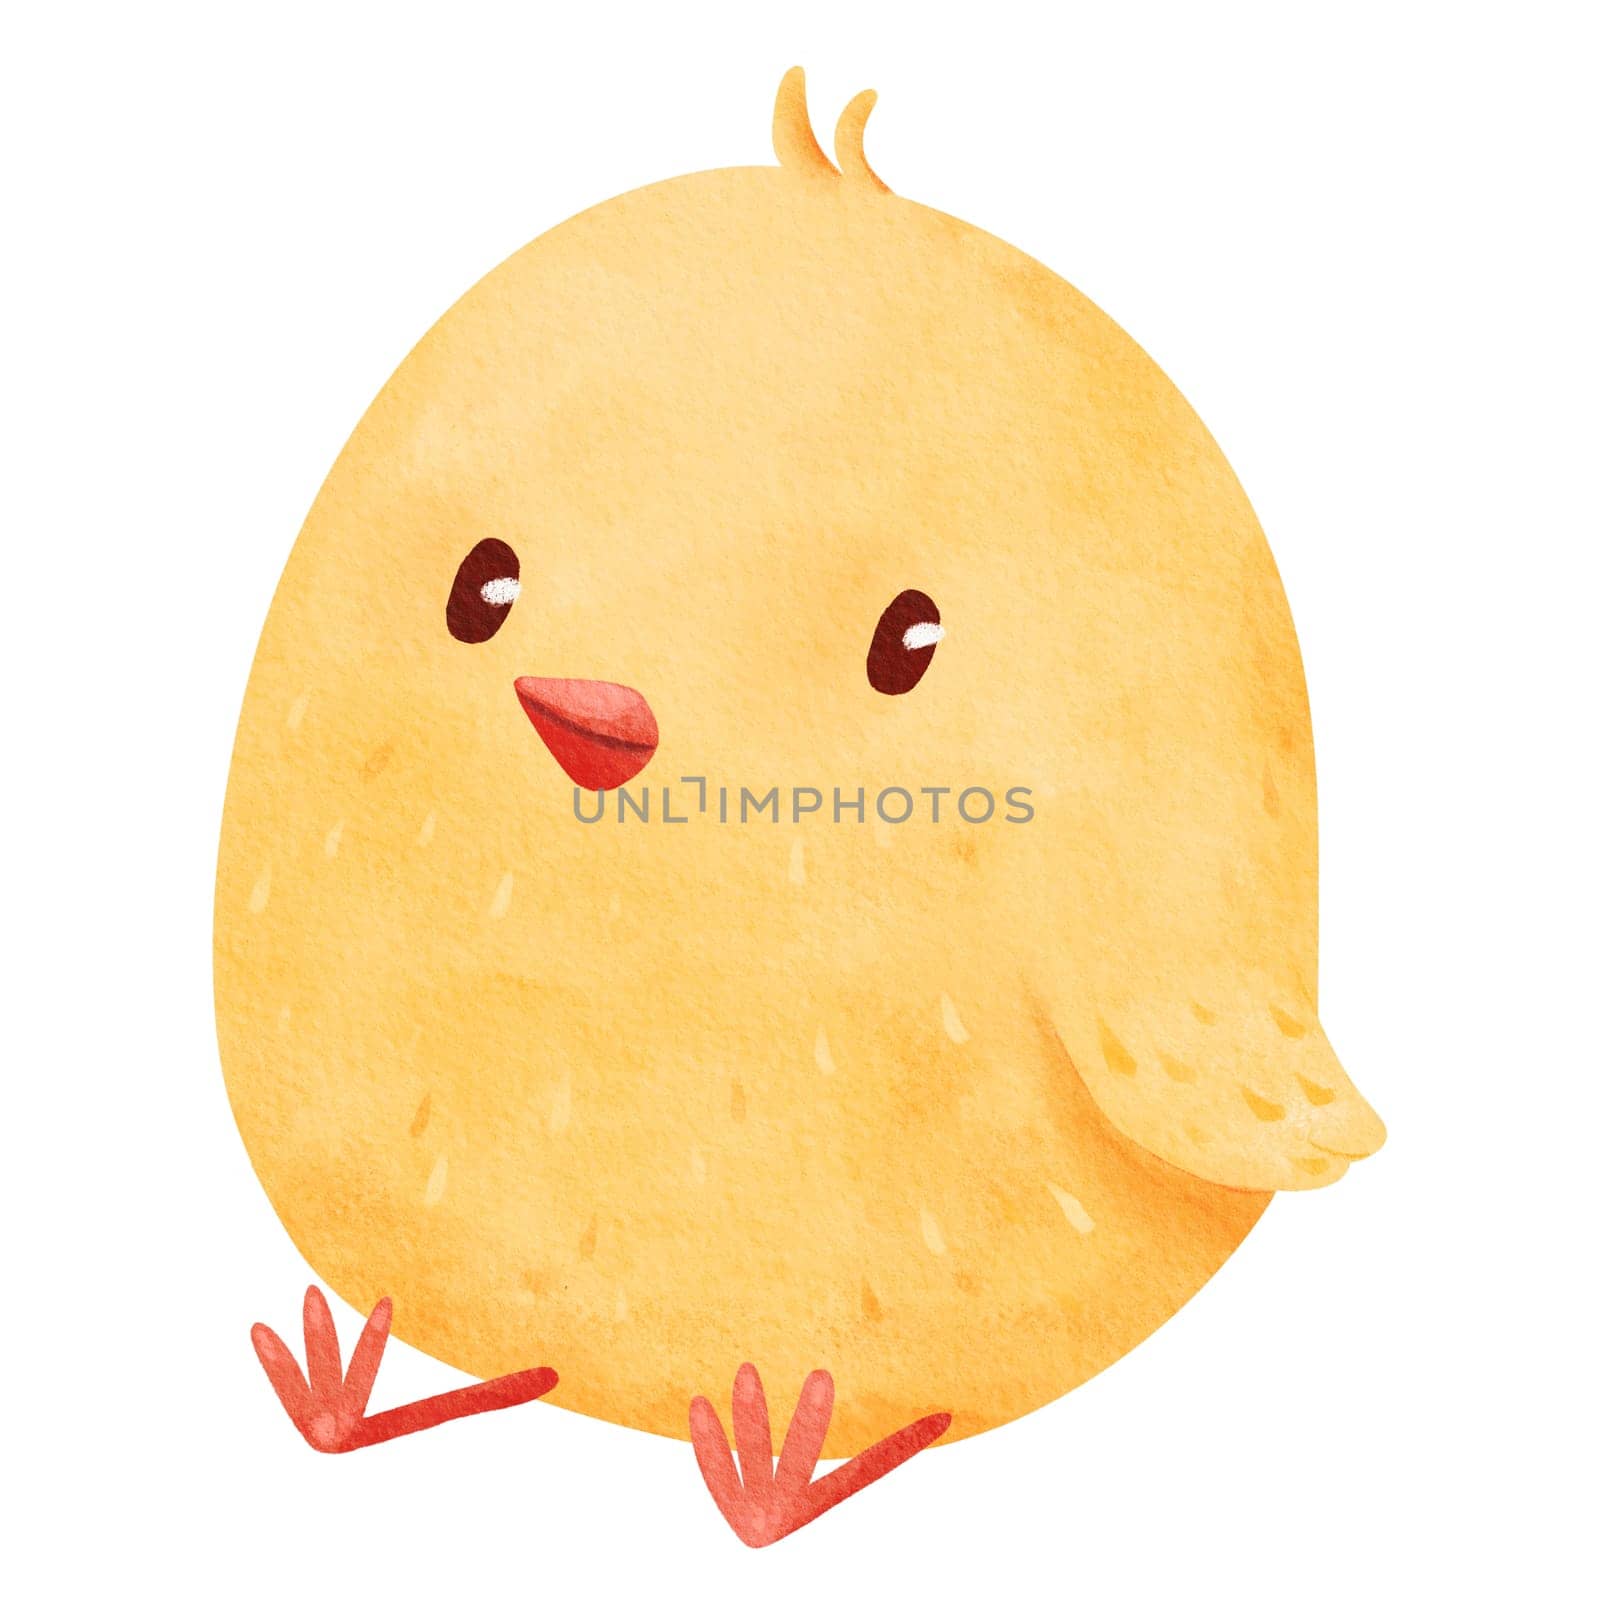 Adorable, fluffy yellow chick sitting. Perfect for a newborn baby card, capturing the sweet essence of a little one. Ideal for conveying heartfelt wishes and joy for the newest arrival. Watercolor by Art_Mari_Ka